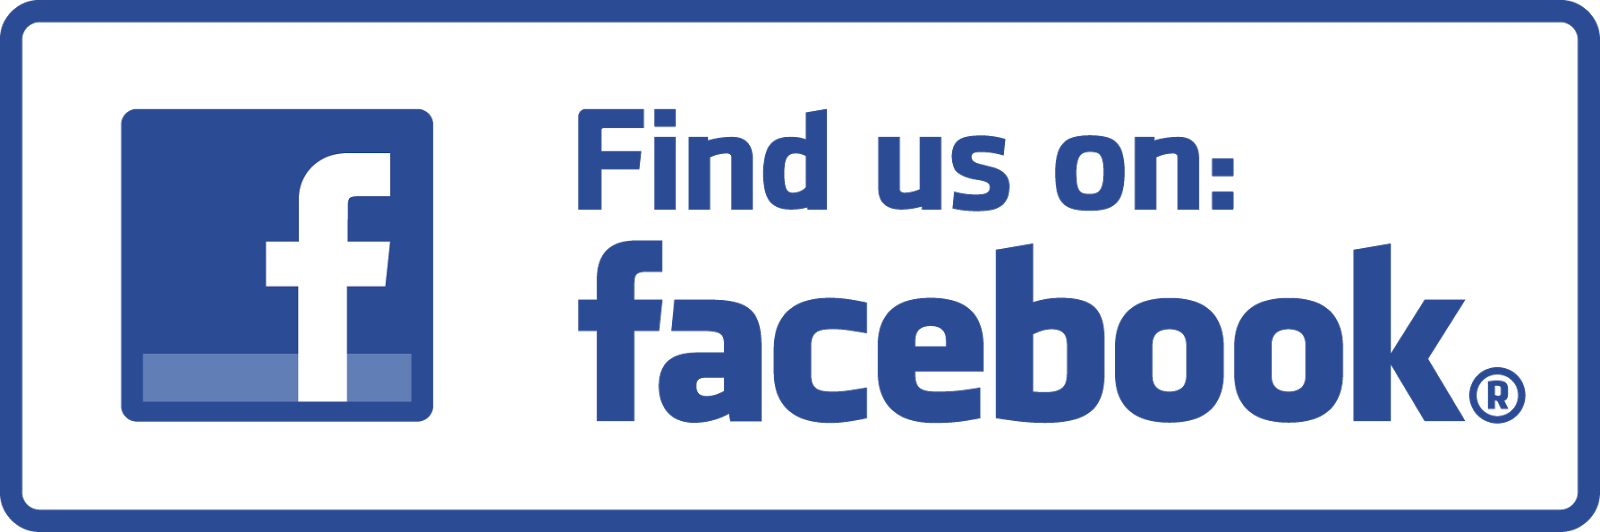 Check out our Facebook Page